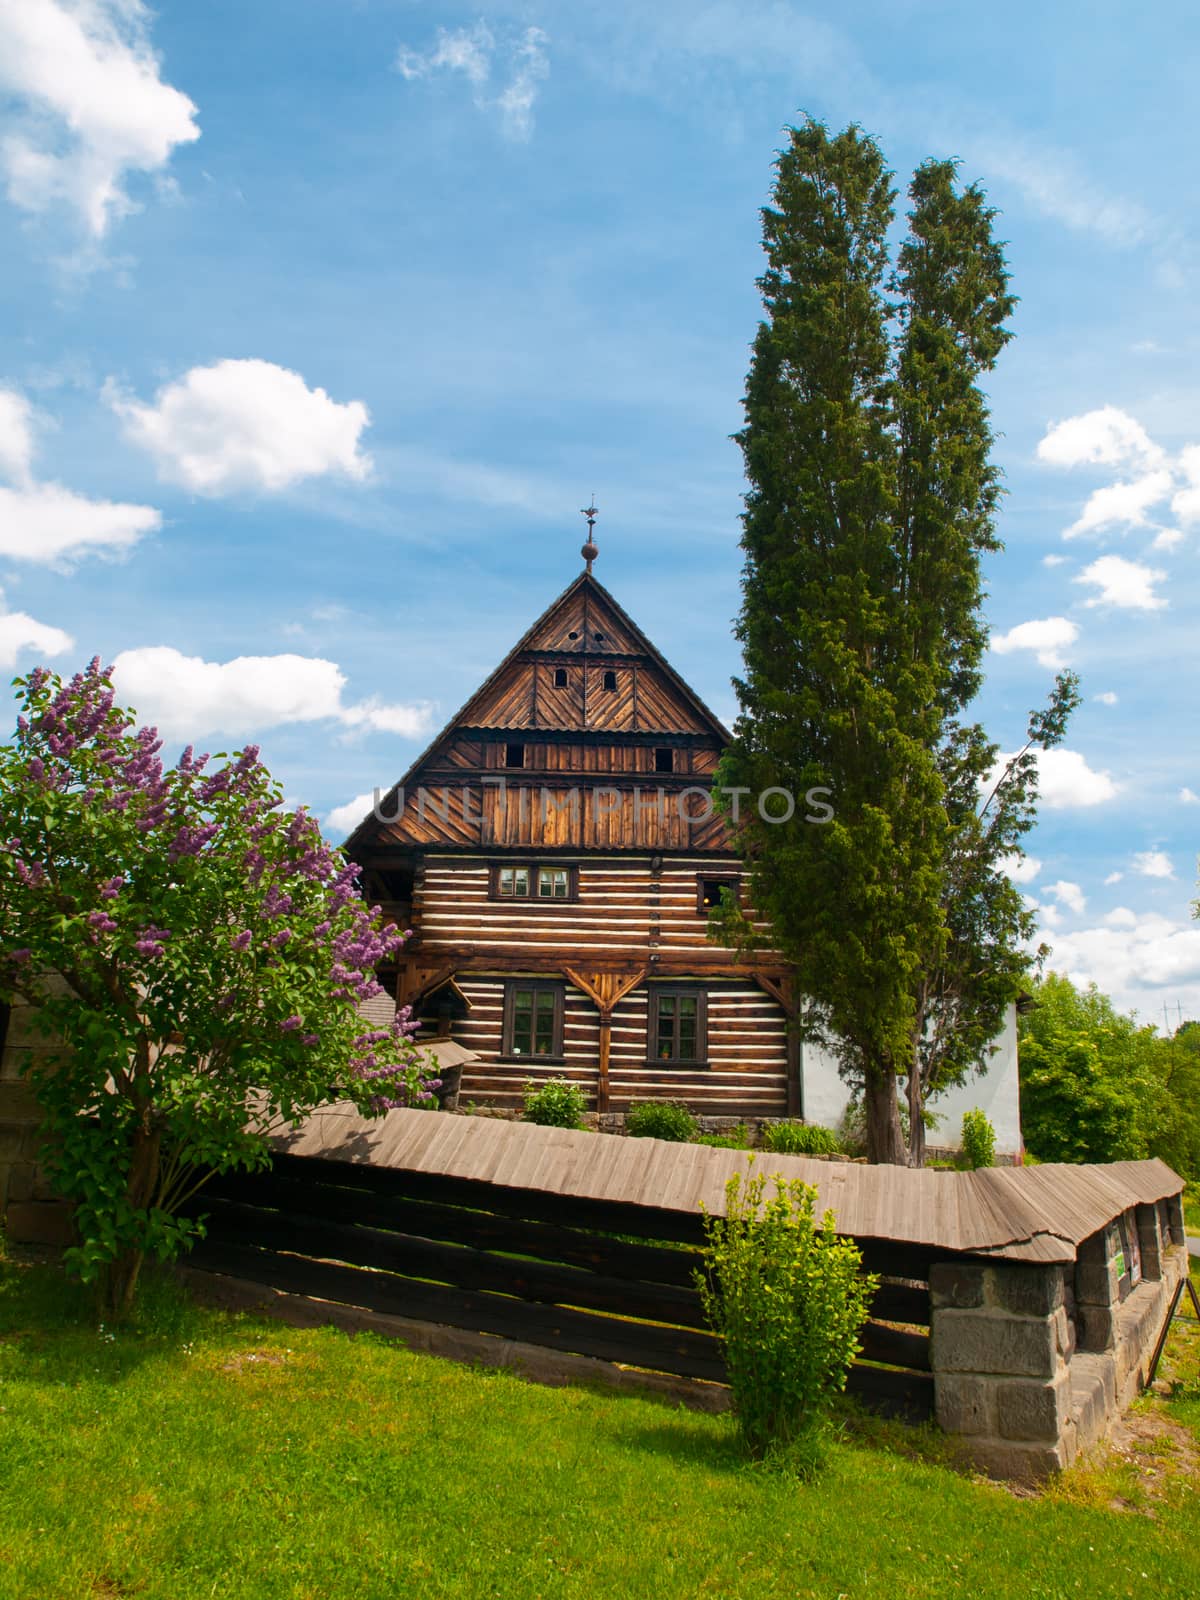 The Dlaskuv statek Farm - old timbered building typical for Jizera region. Sunny summer day shot with blue sky. by pyty